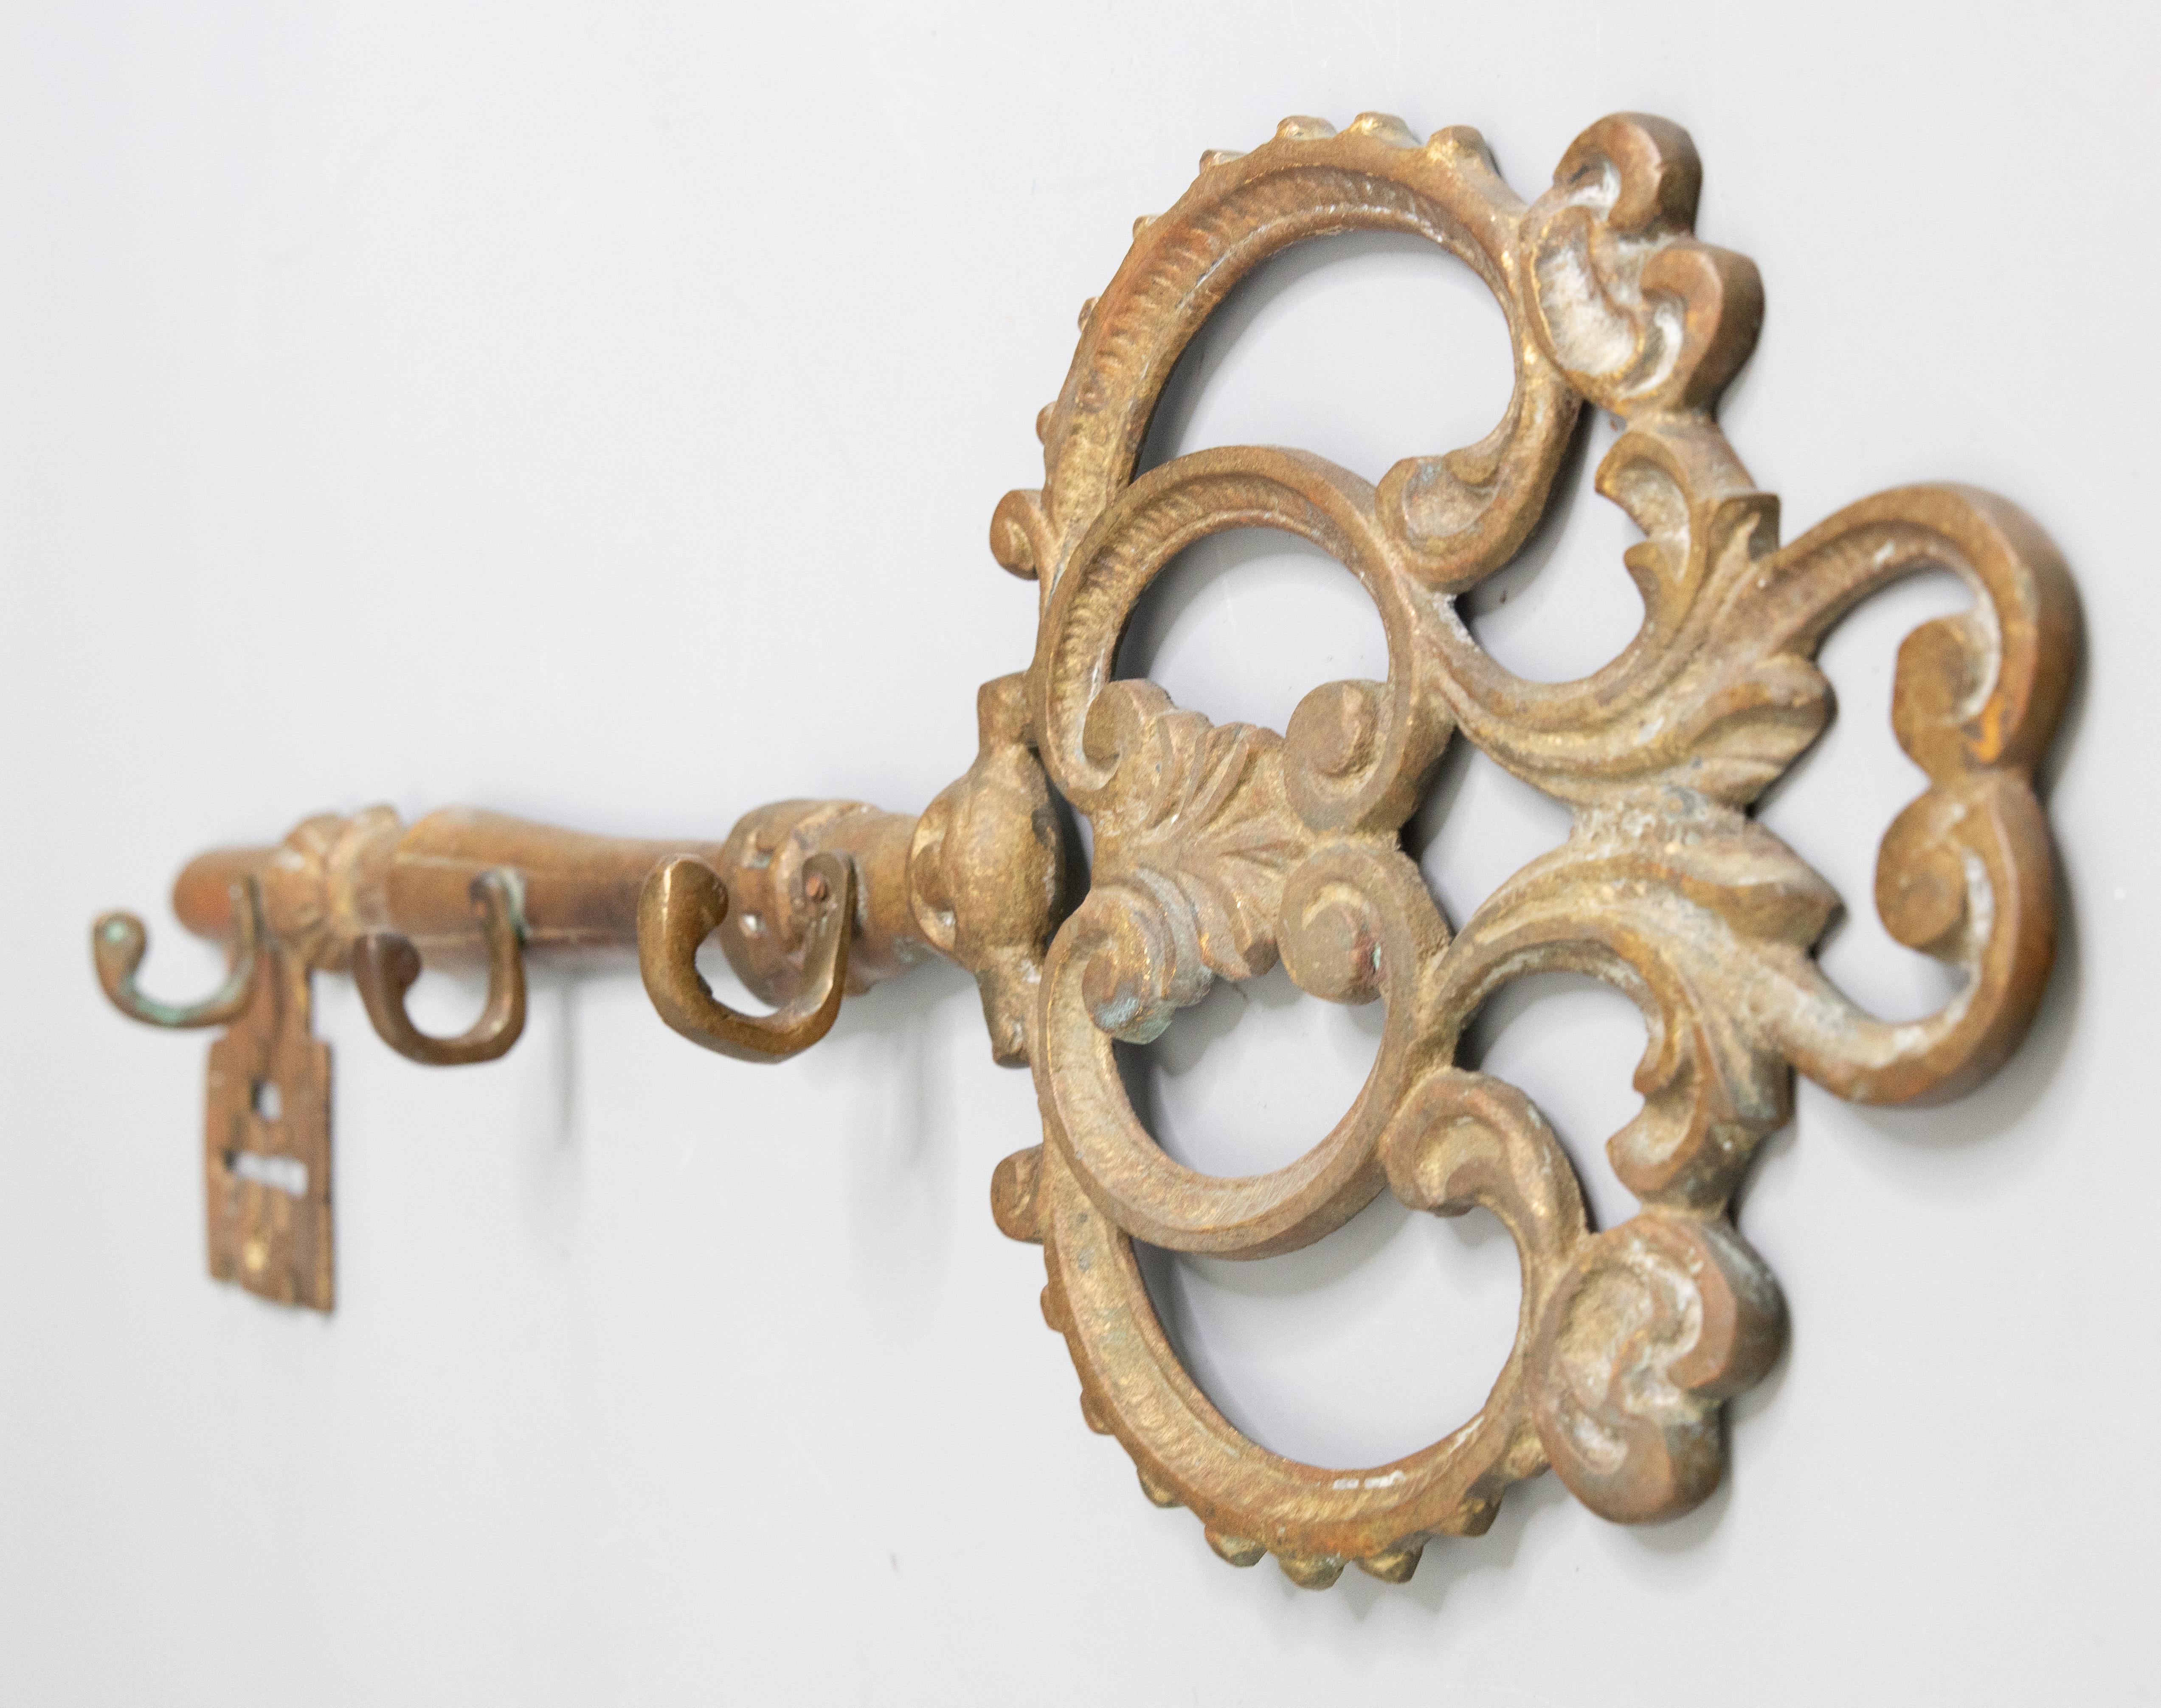 A fabulous early 20th-Century Art Nouveau period French brass decorative key shaped coat or hat rack. This charming coat rack has an ornate key design with a lovely aged brass patina. It's a nice large size, sturdy and heavy with three hooks,